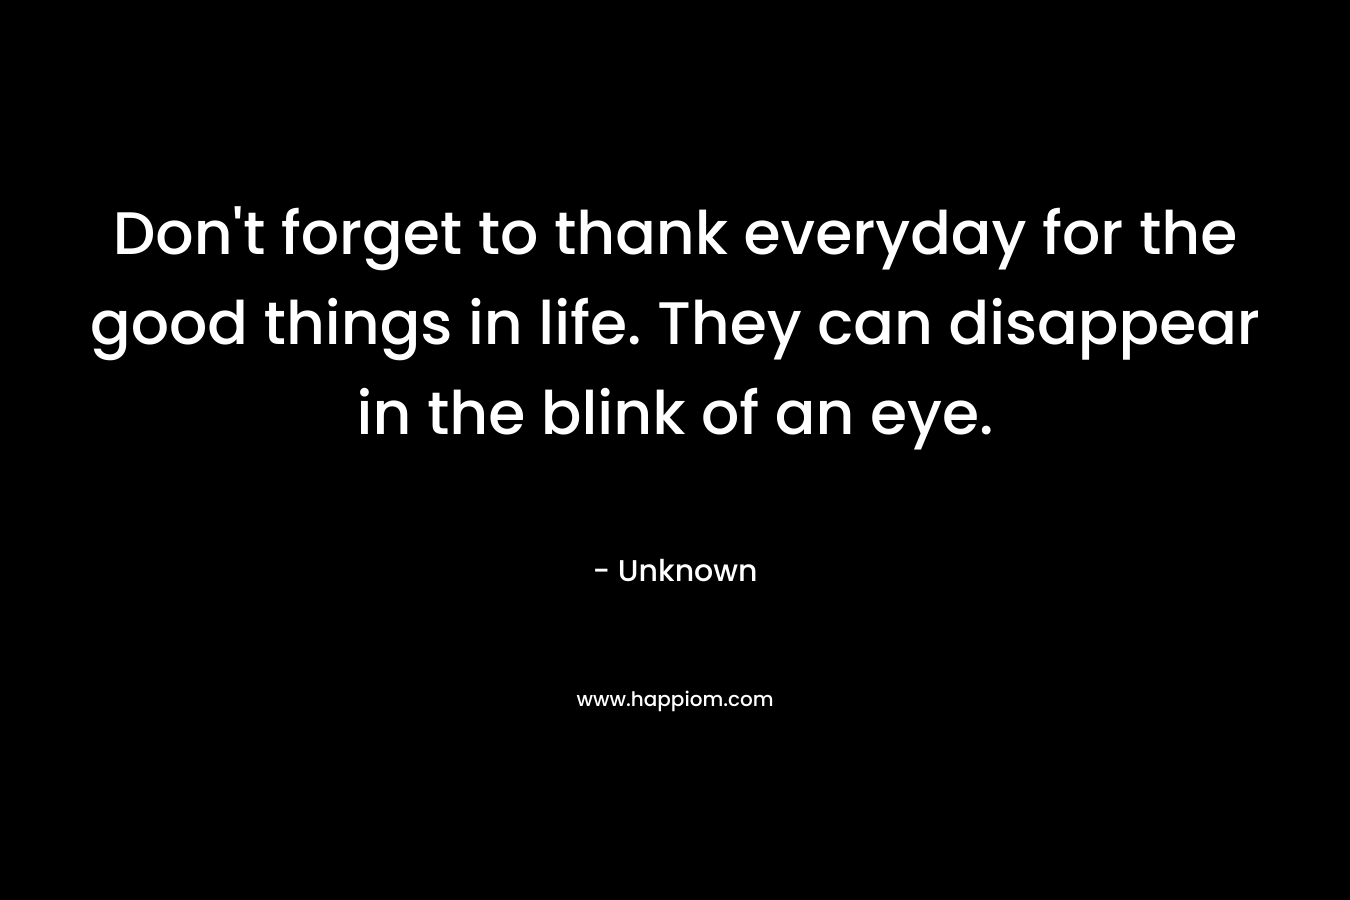 Don’t forget to thank everyday for the good things in life. They can disappear in the blink of an eye. – Unknown